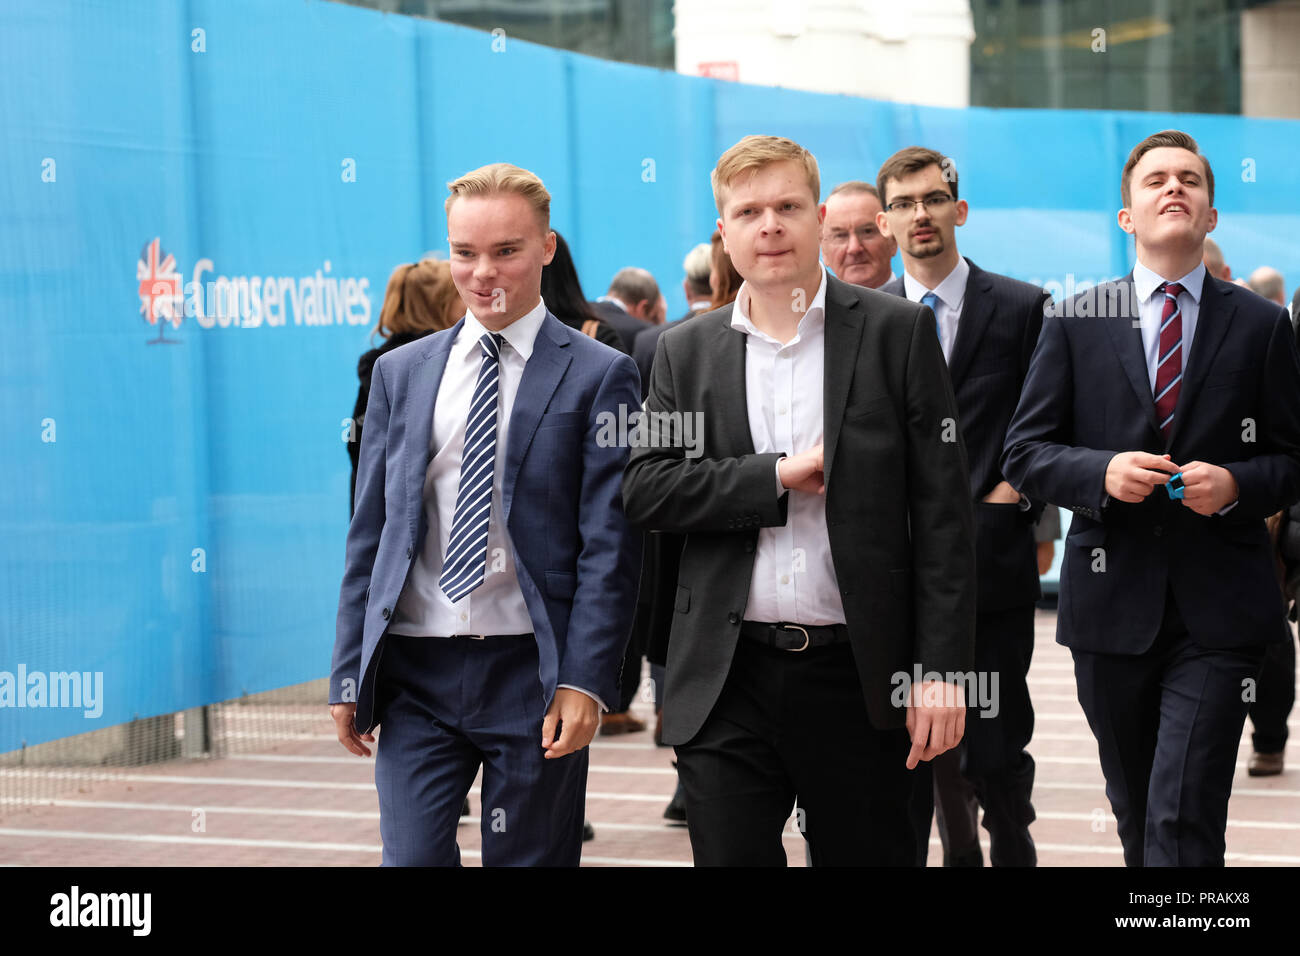 Birmingham, UK. 30th September 2018 - Young Tory party delegates arrive for the first day of the Conservative Party Conference at the ICC in Birmingham  - Photo Steven May / Alamy Live News Stock Photo